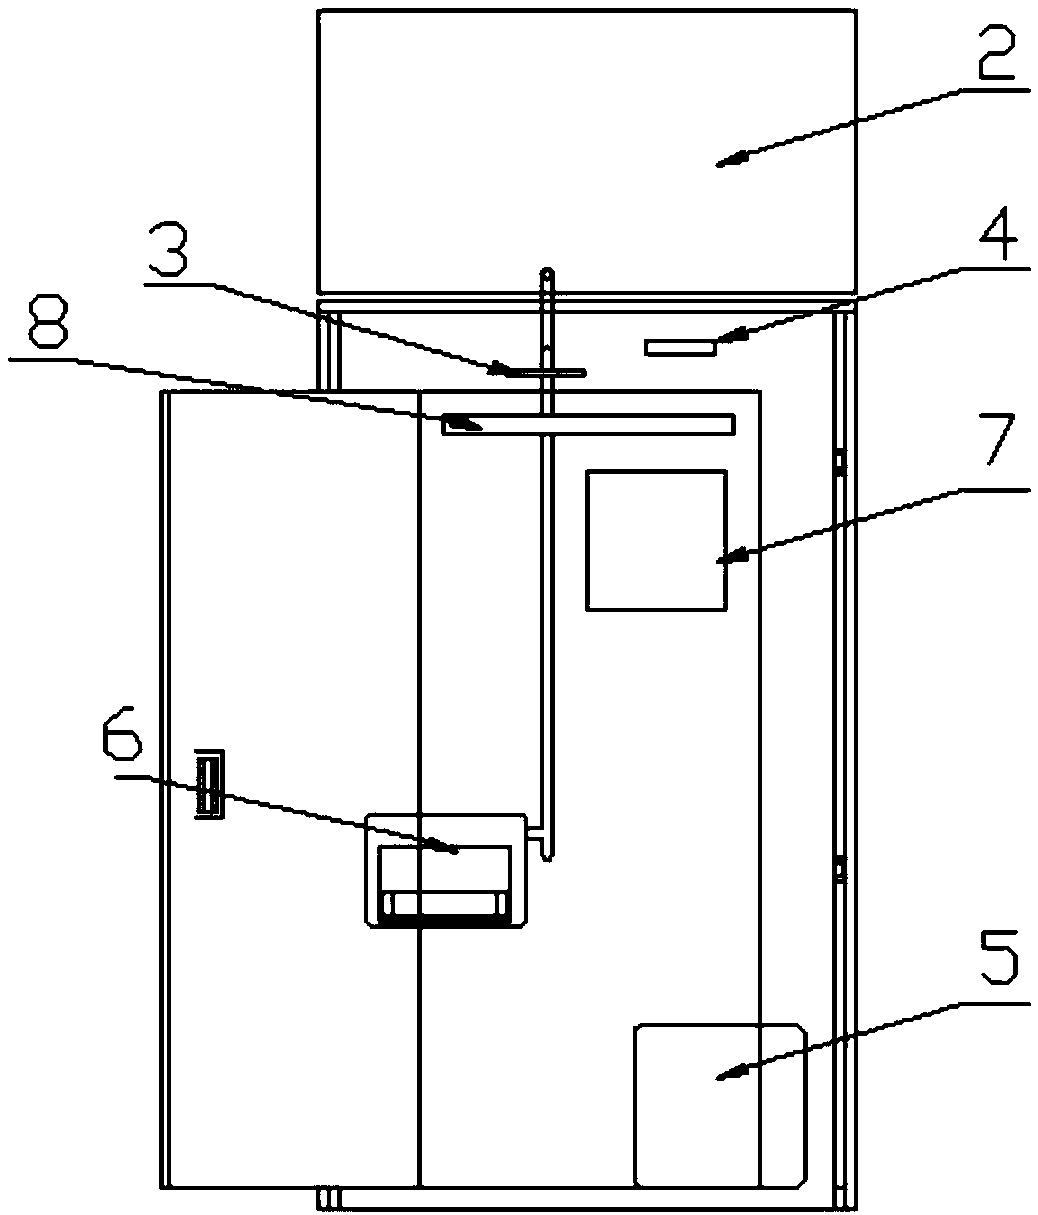 Vehicle-mounted pumping shower system